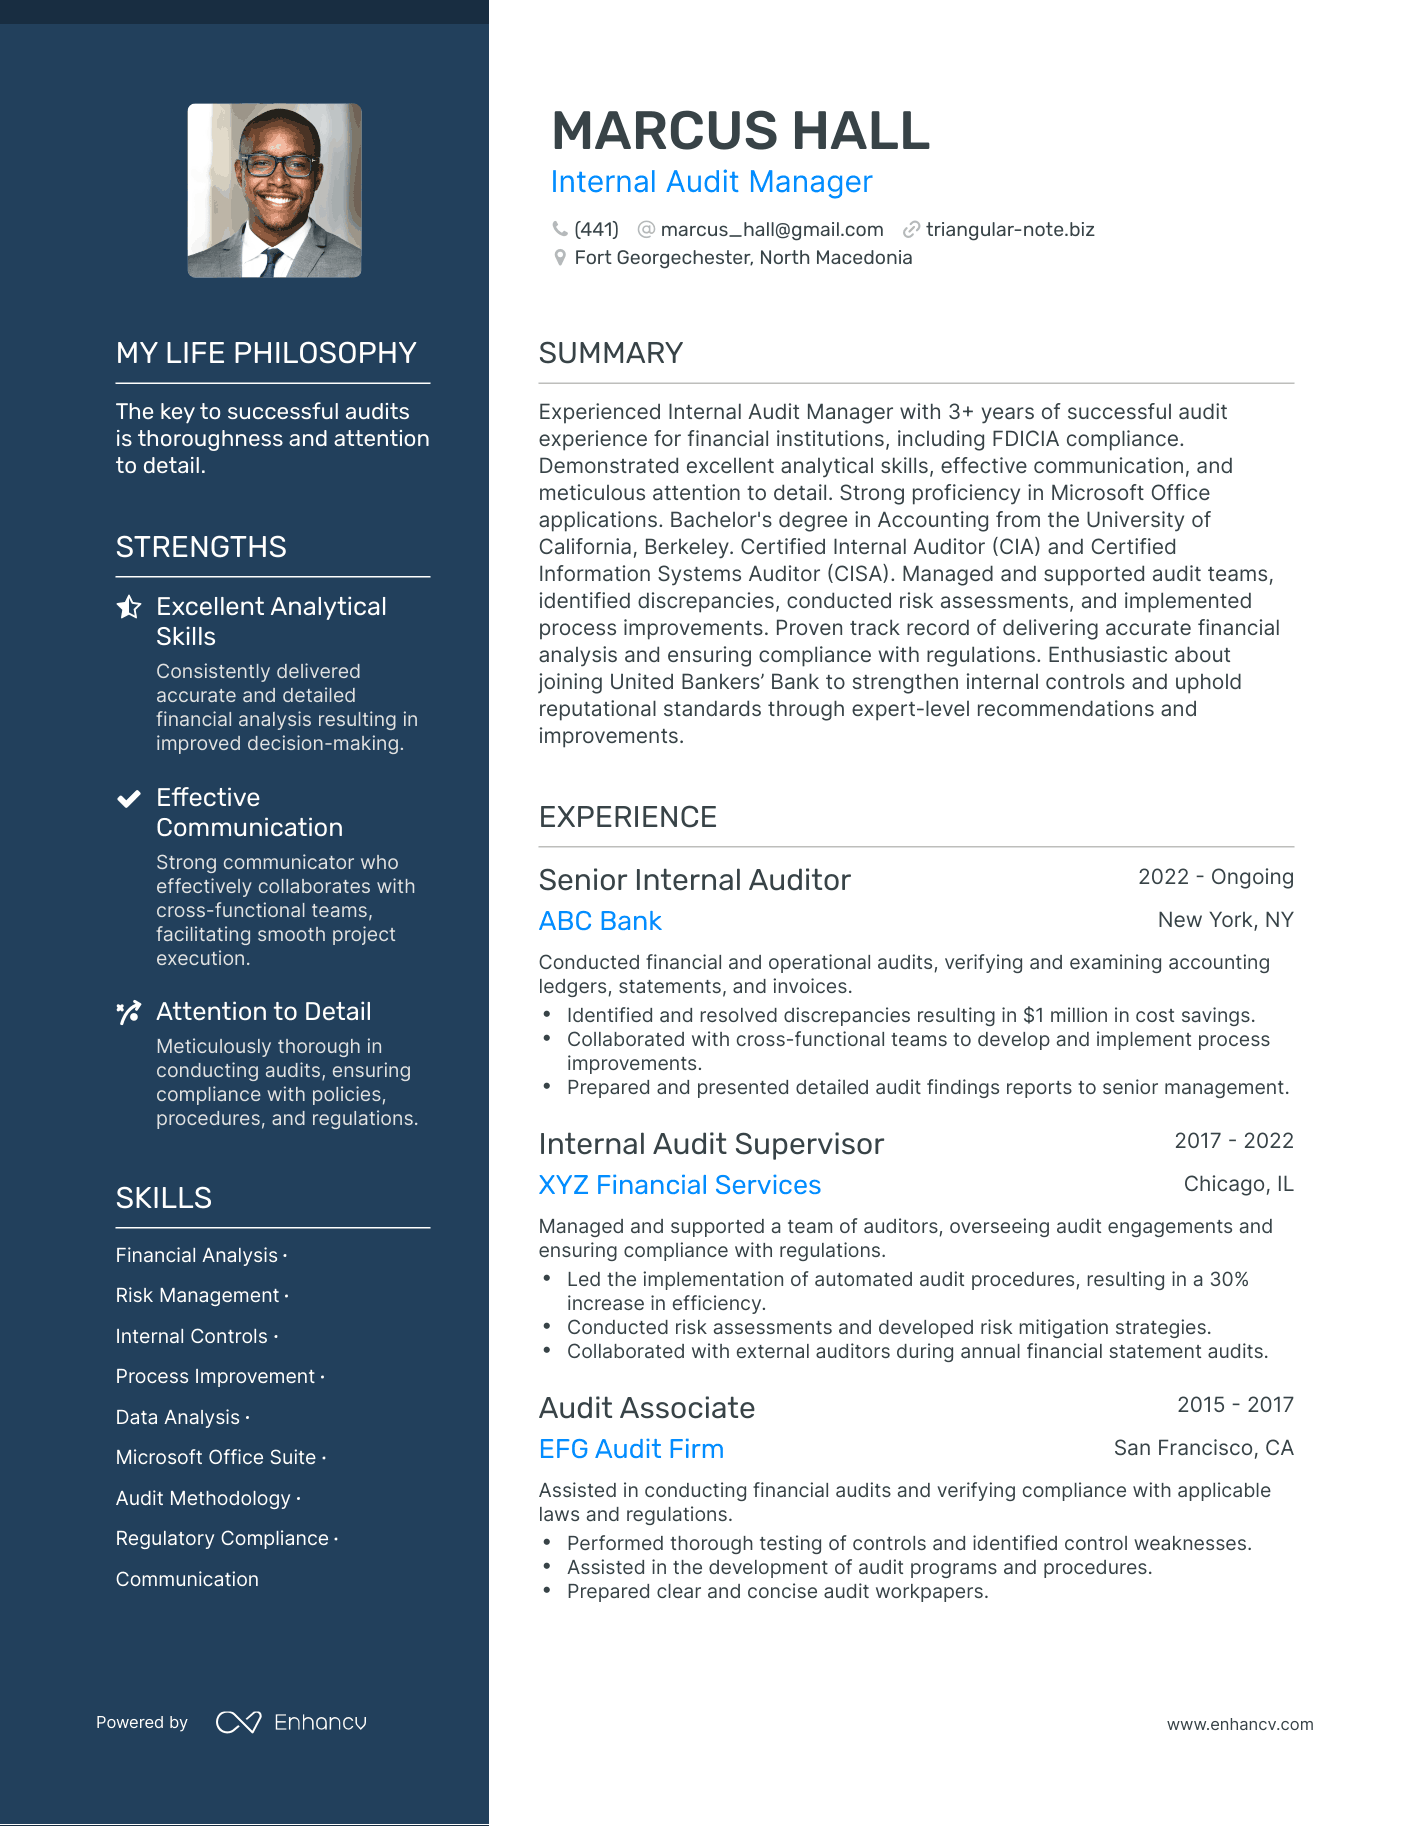 Internal Audit Manager resume example